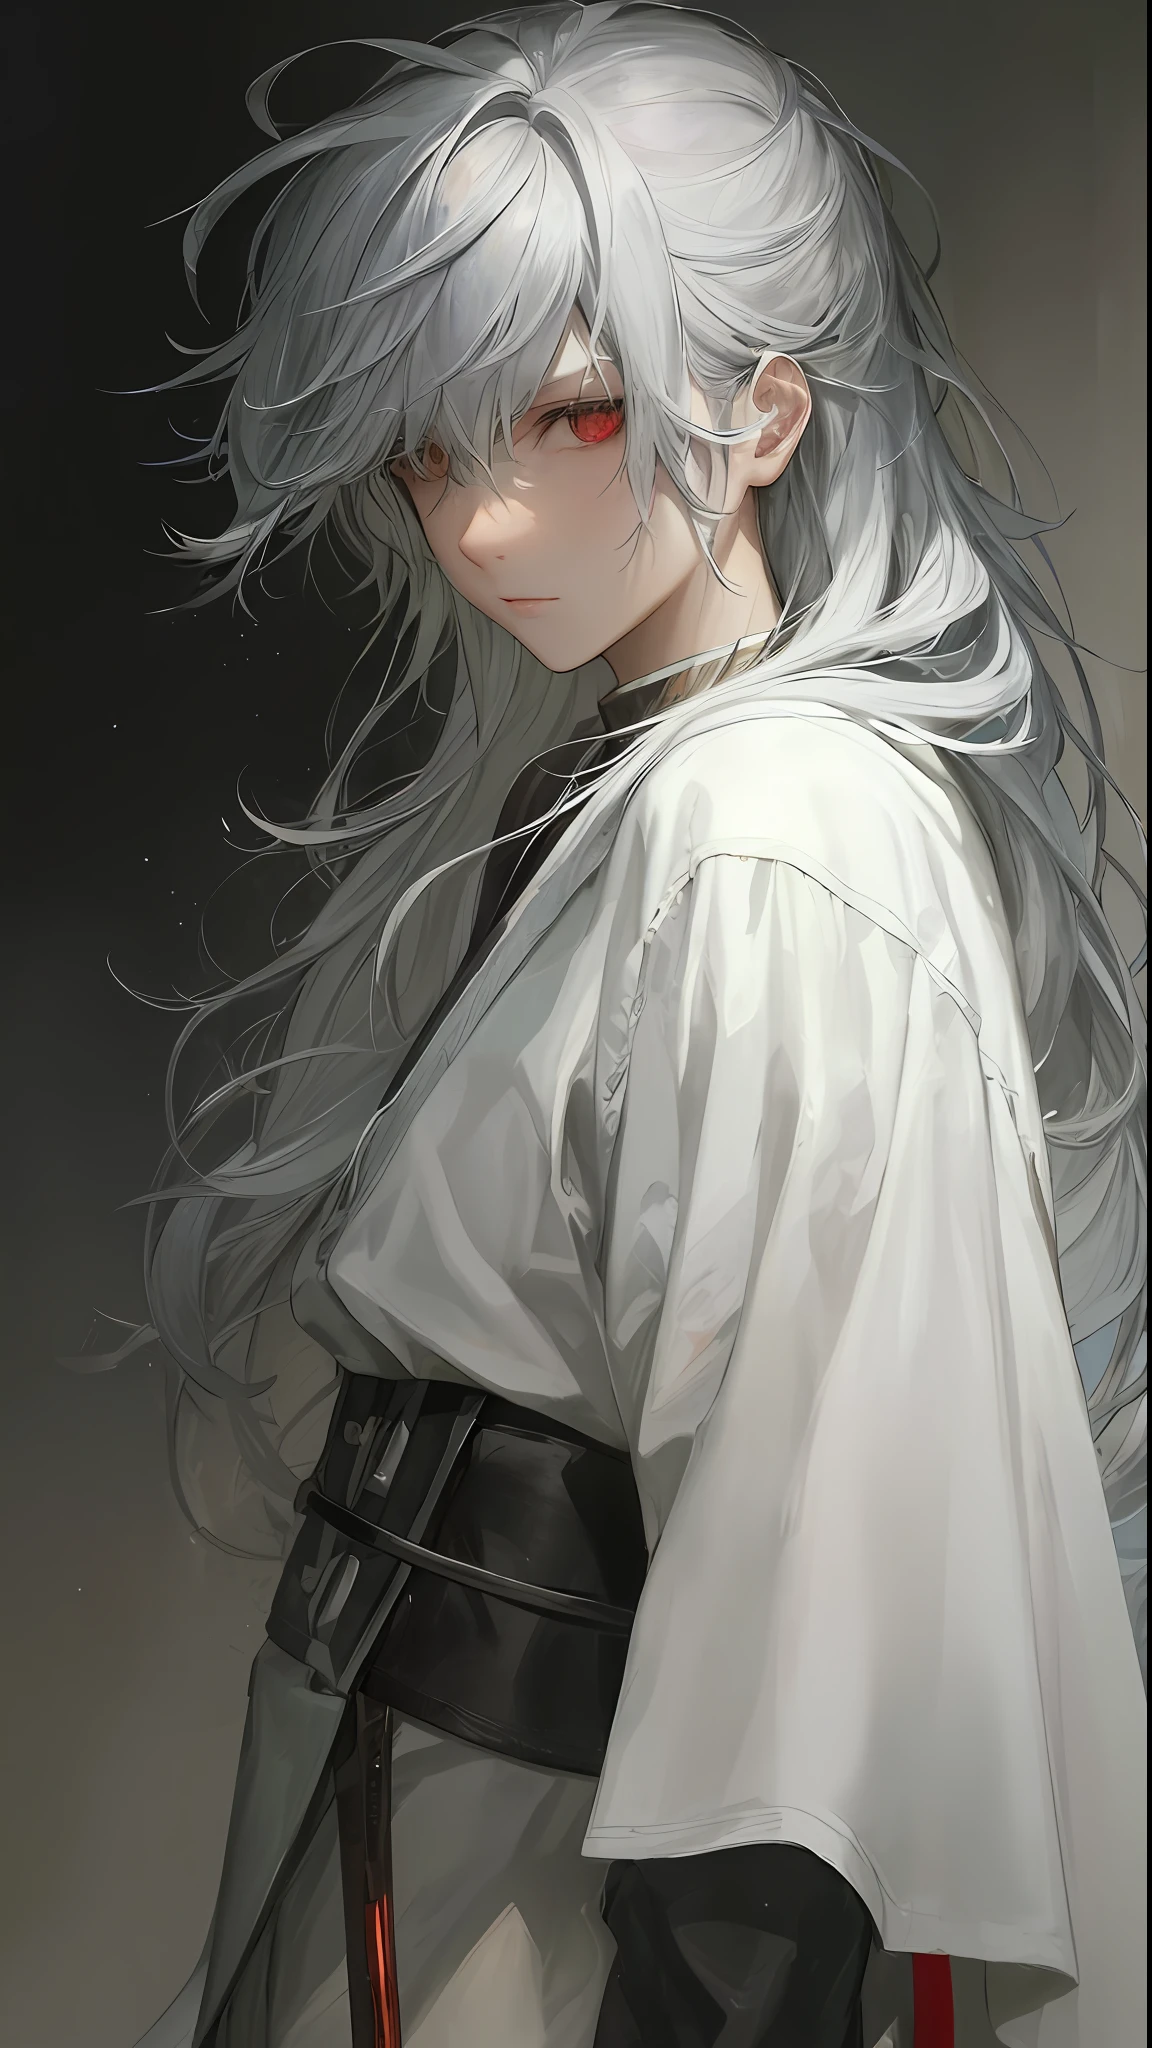 a close up of a person with a white hair and a sword，white-haired god，long  white hair，Long white hair，Guviz-style artwork，White hair，Guviz，handsome guy in demon killer art，beautiful character painting，by Yang J，whaite hair，Guvitz on the Pixif Art Station，anime figure，Red clothes，Red robe，Black tunic